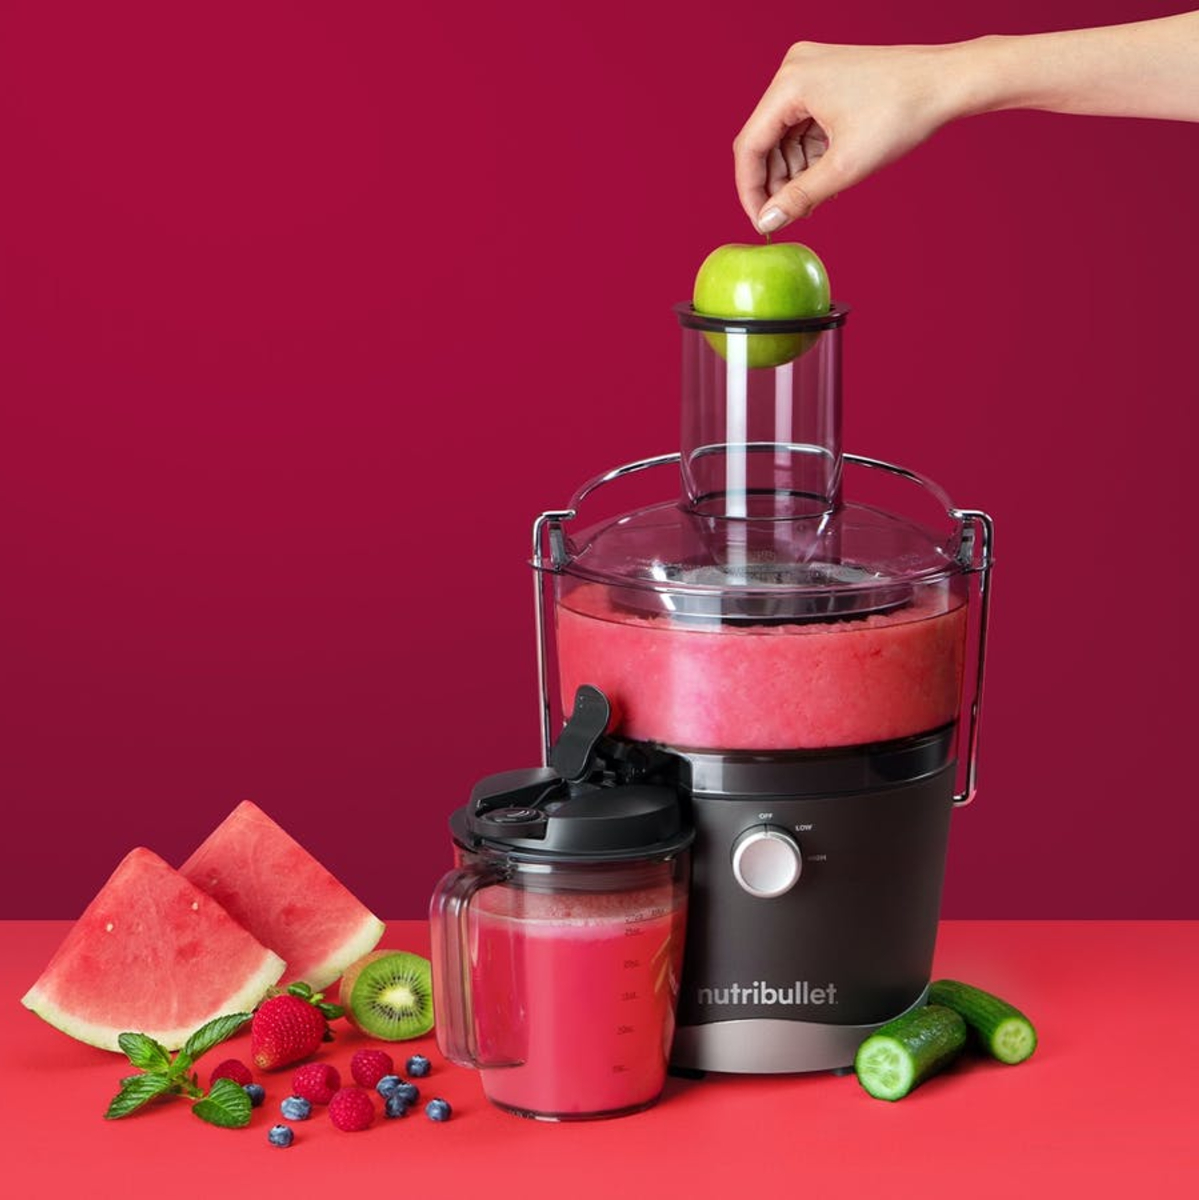 Magic Bullet personal blenders on sale for just $30 at